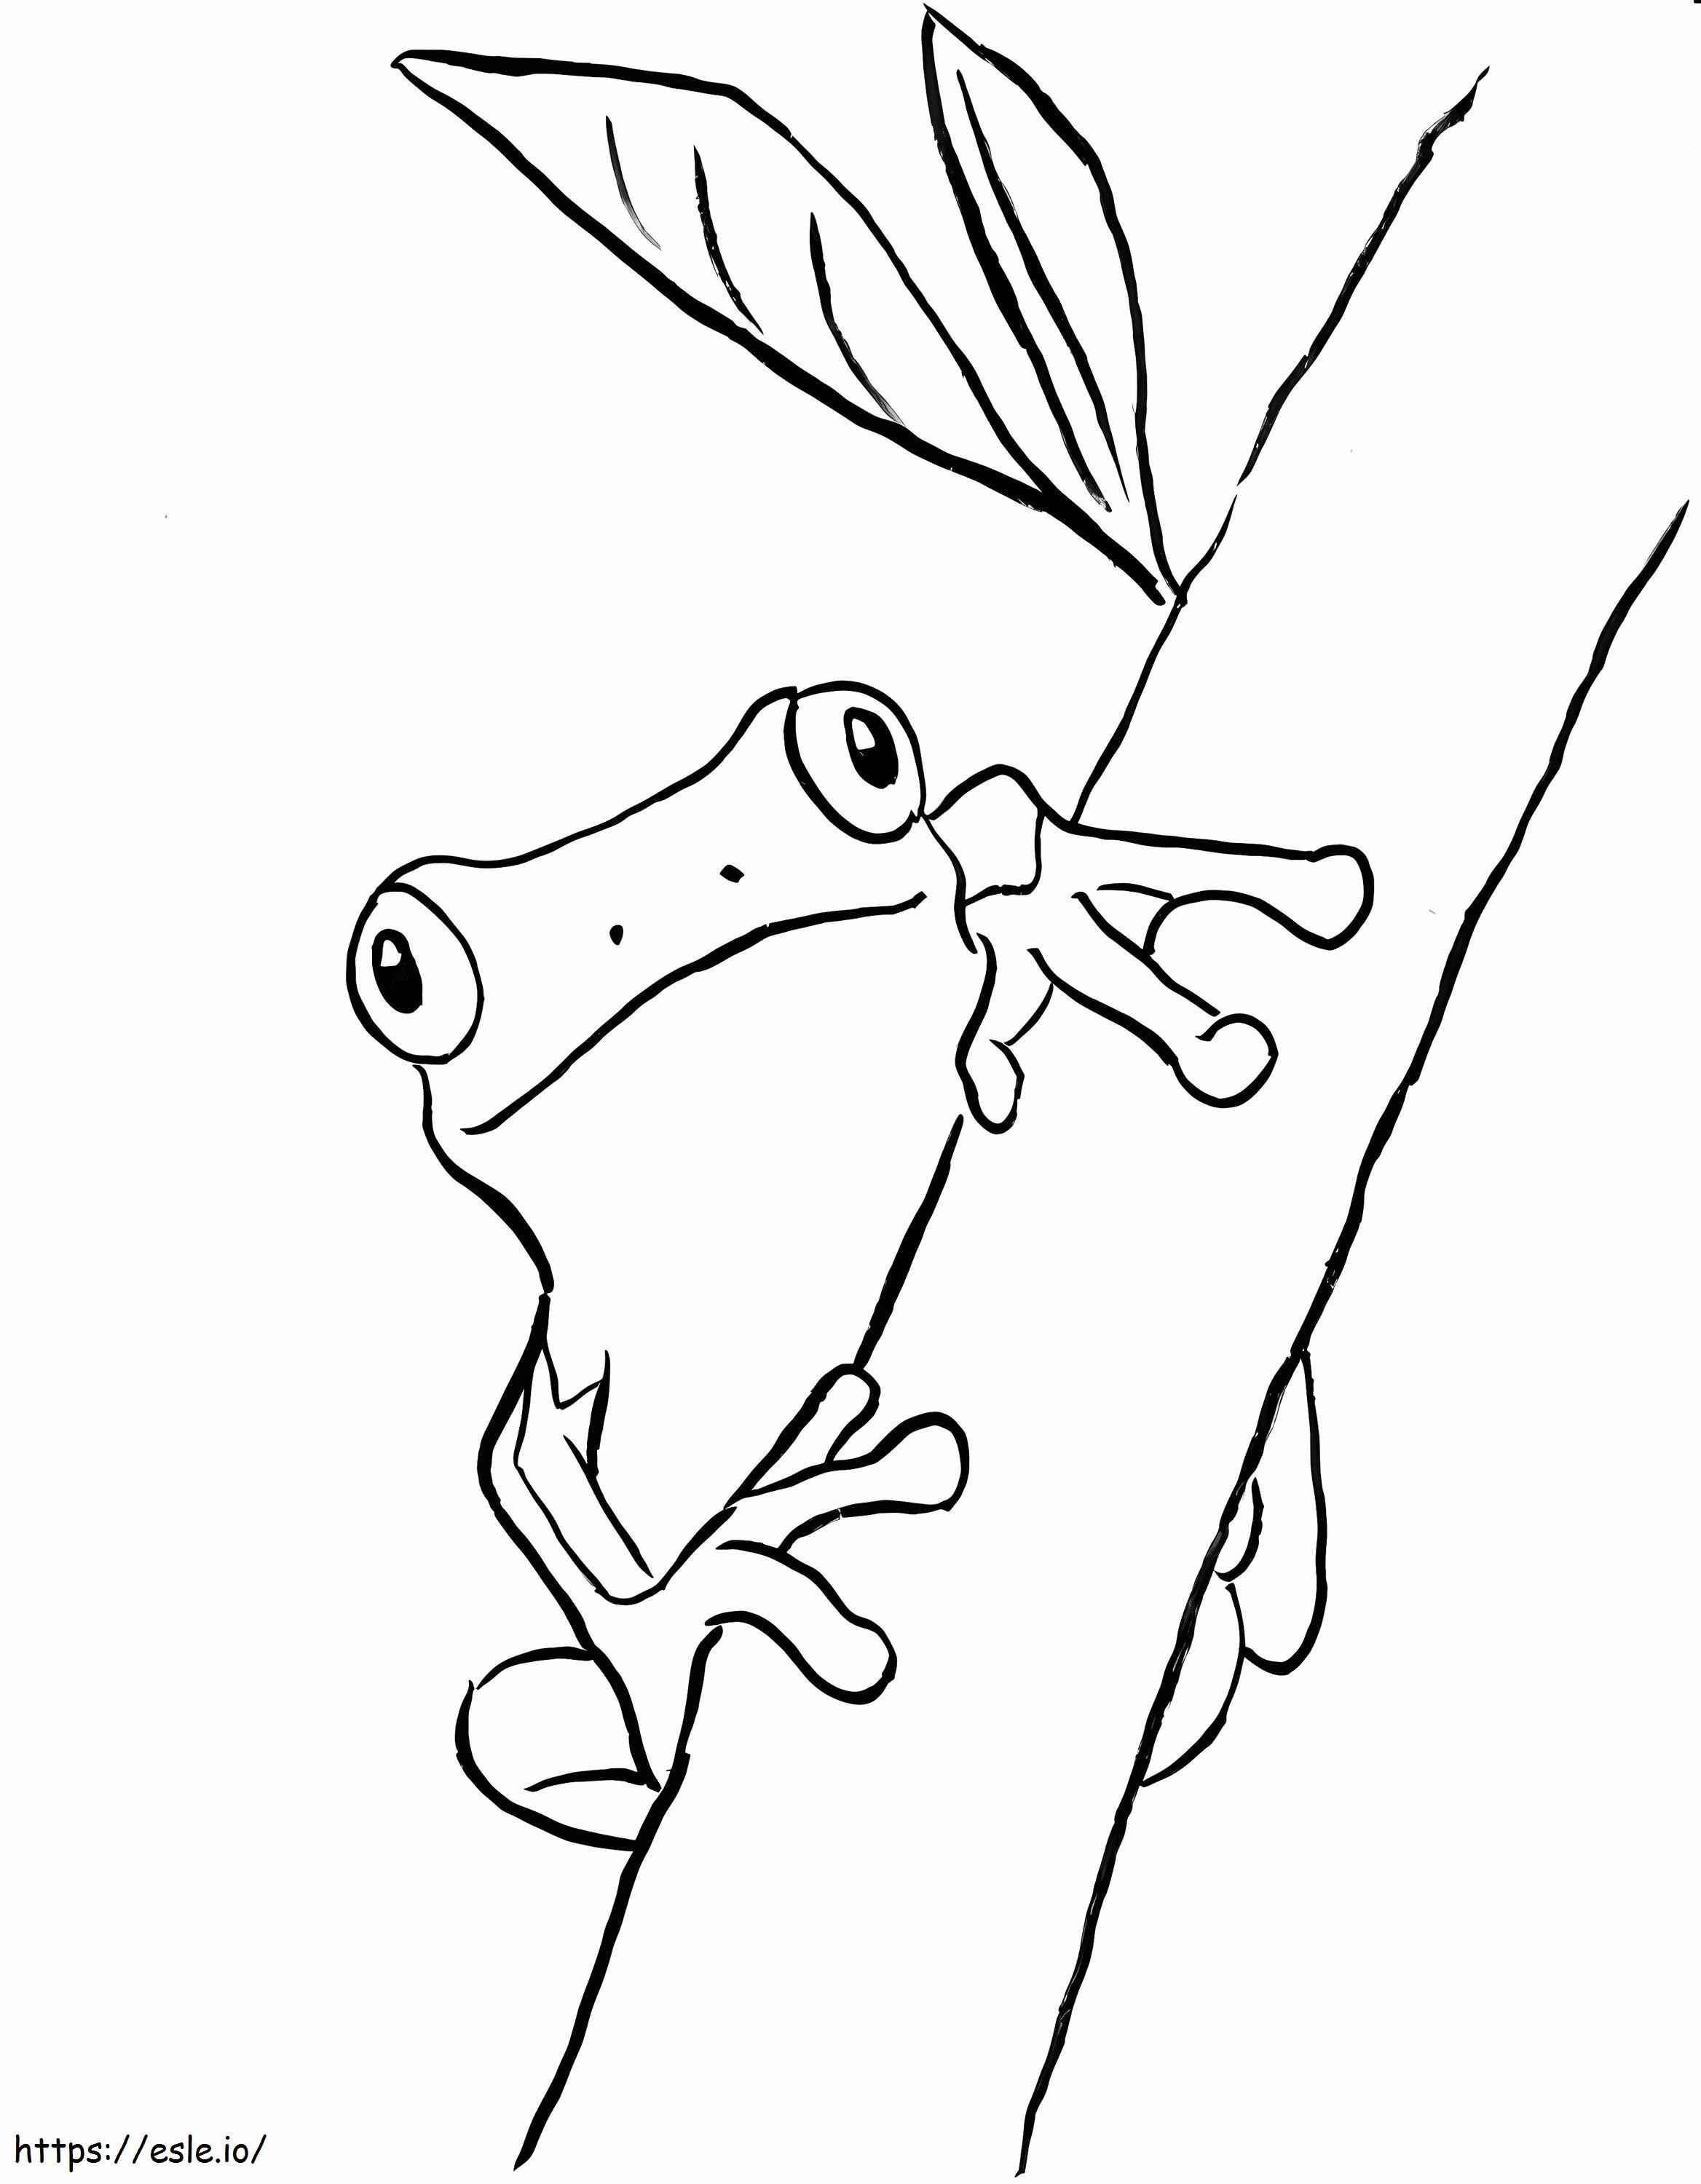 Frog Climbing Branch Tree coloring page